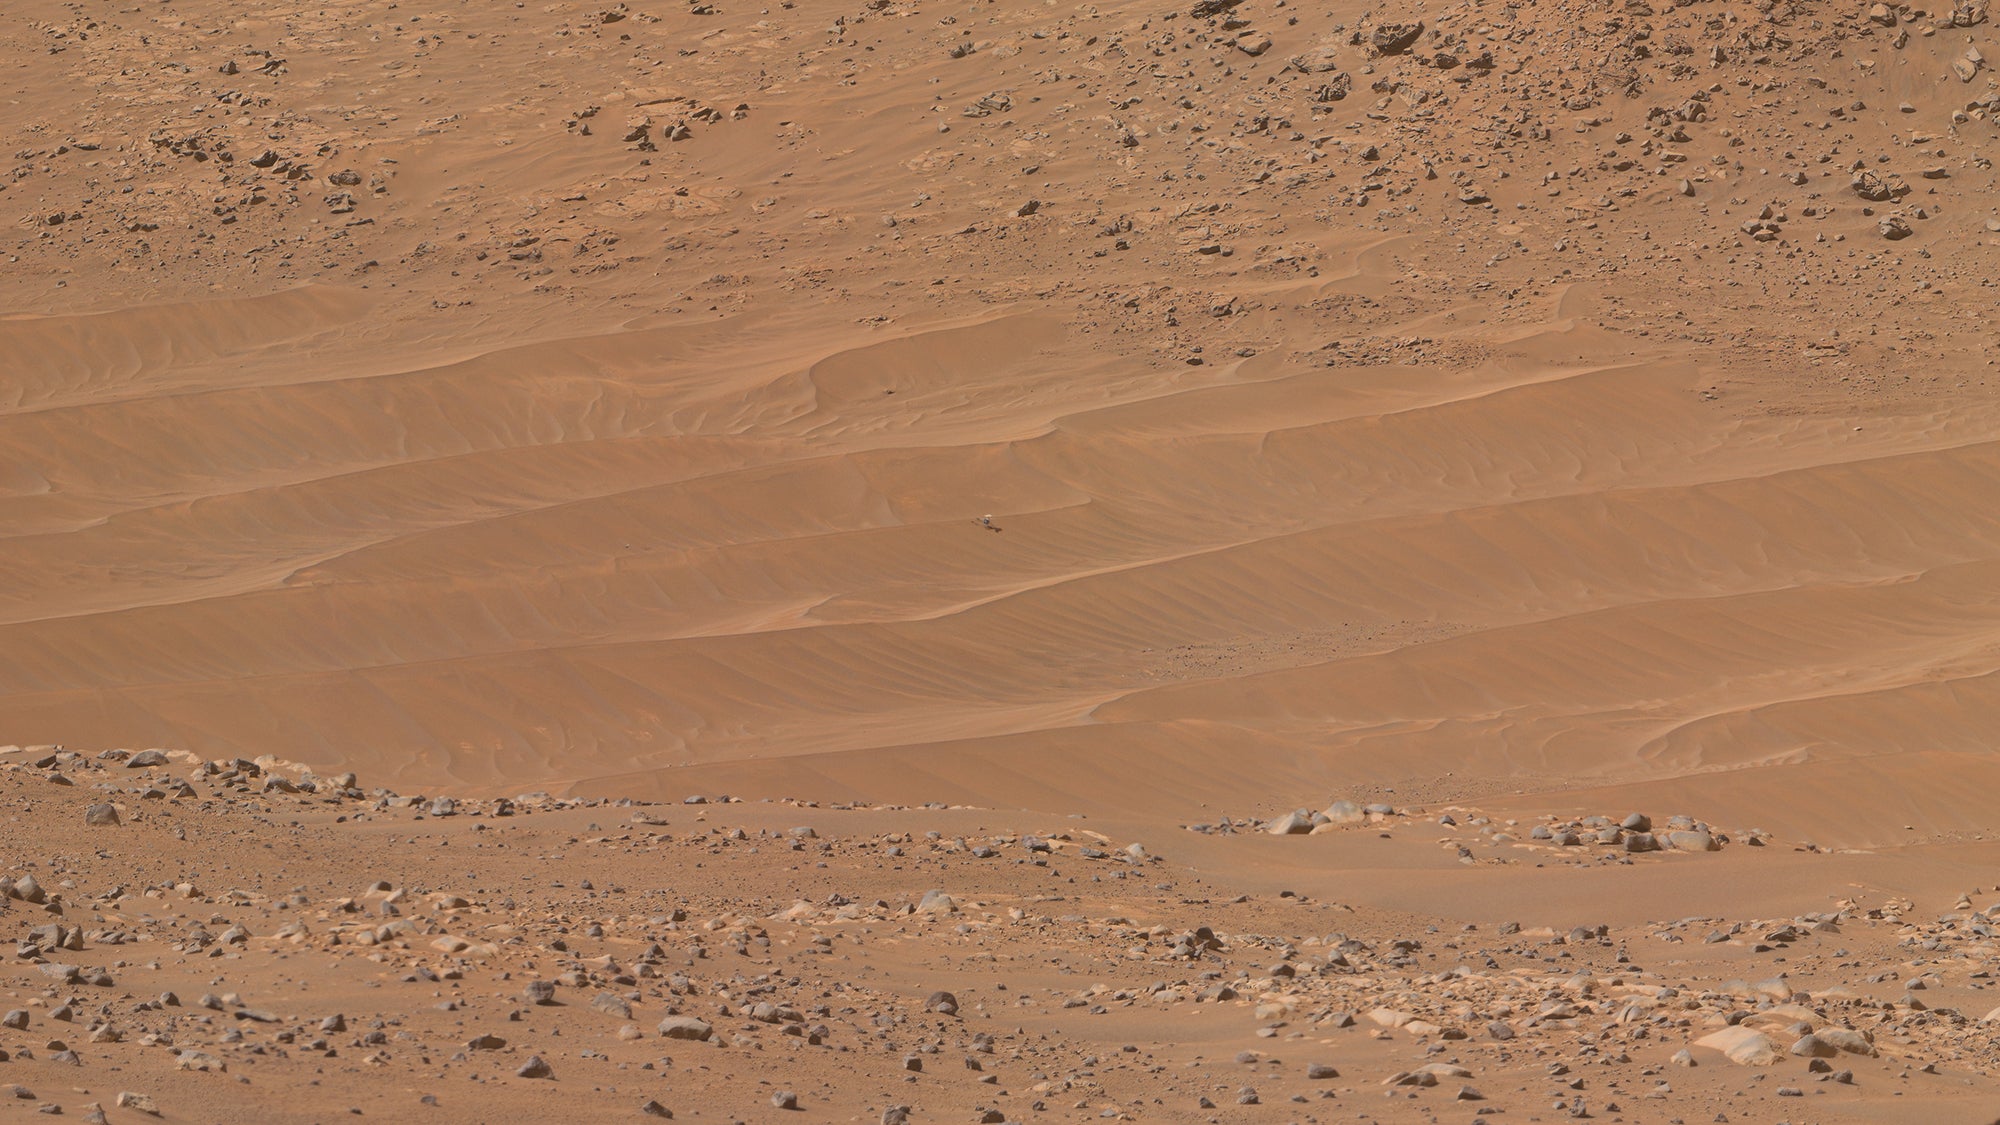 NASA’s Perseverance Rover spots damaged, lonely Ingenuity helicopter in the ‘bland’ part of Mars thumbnail